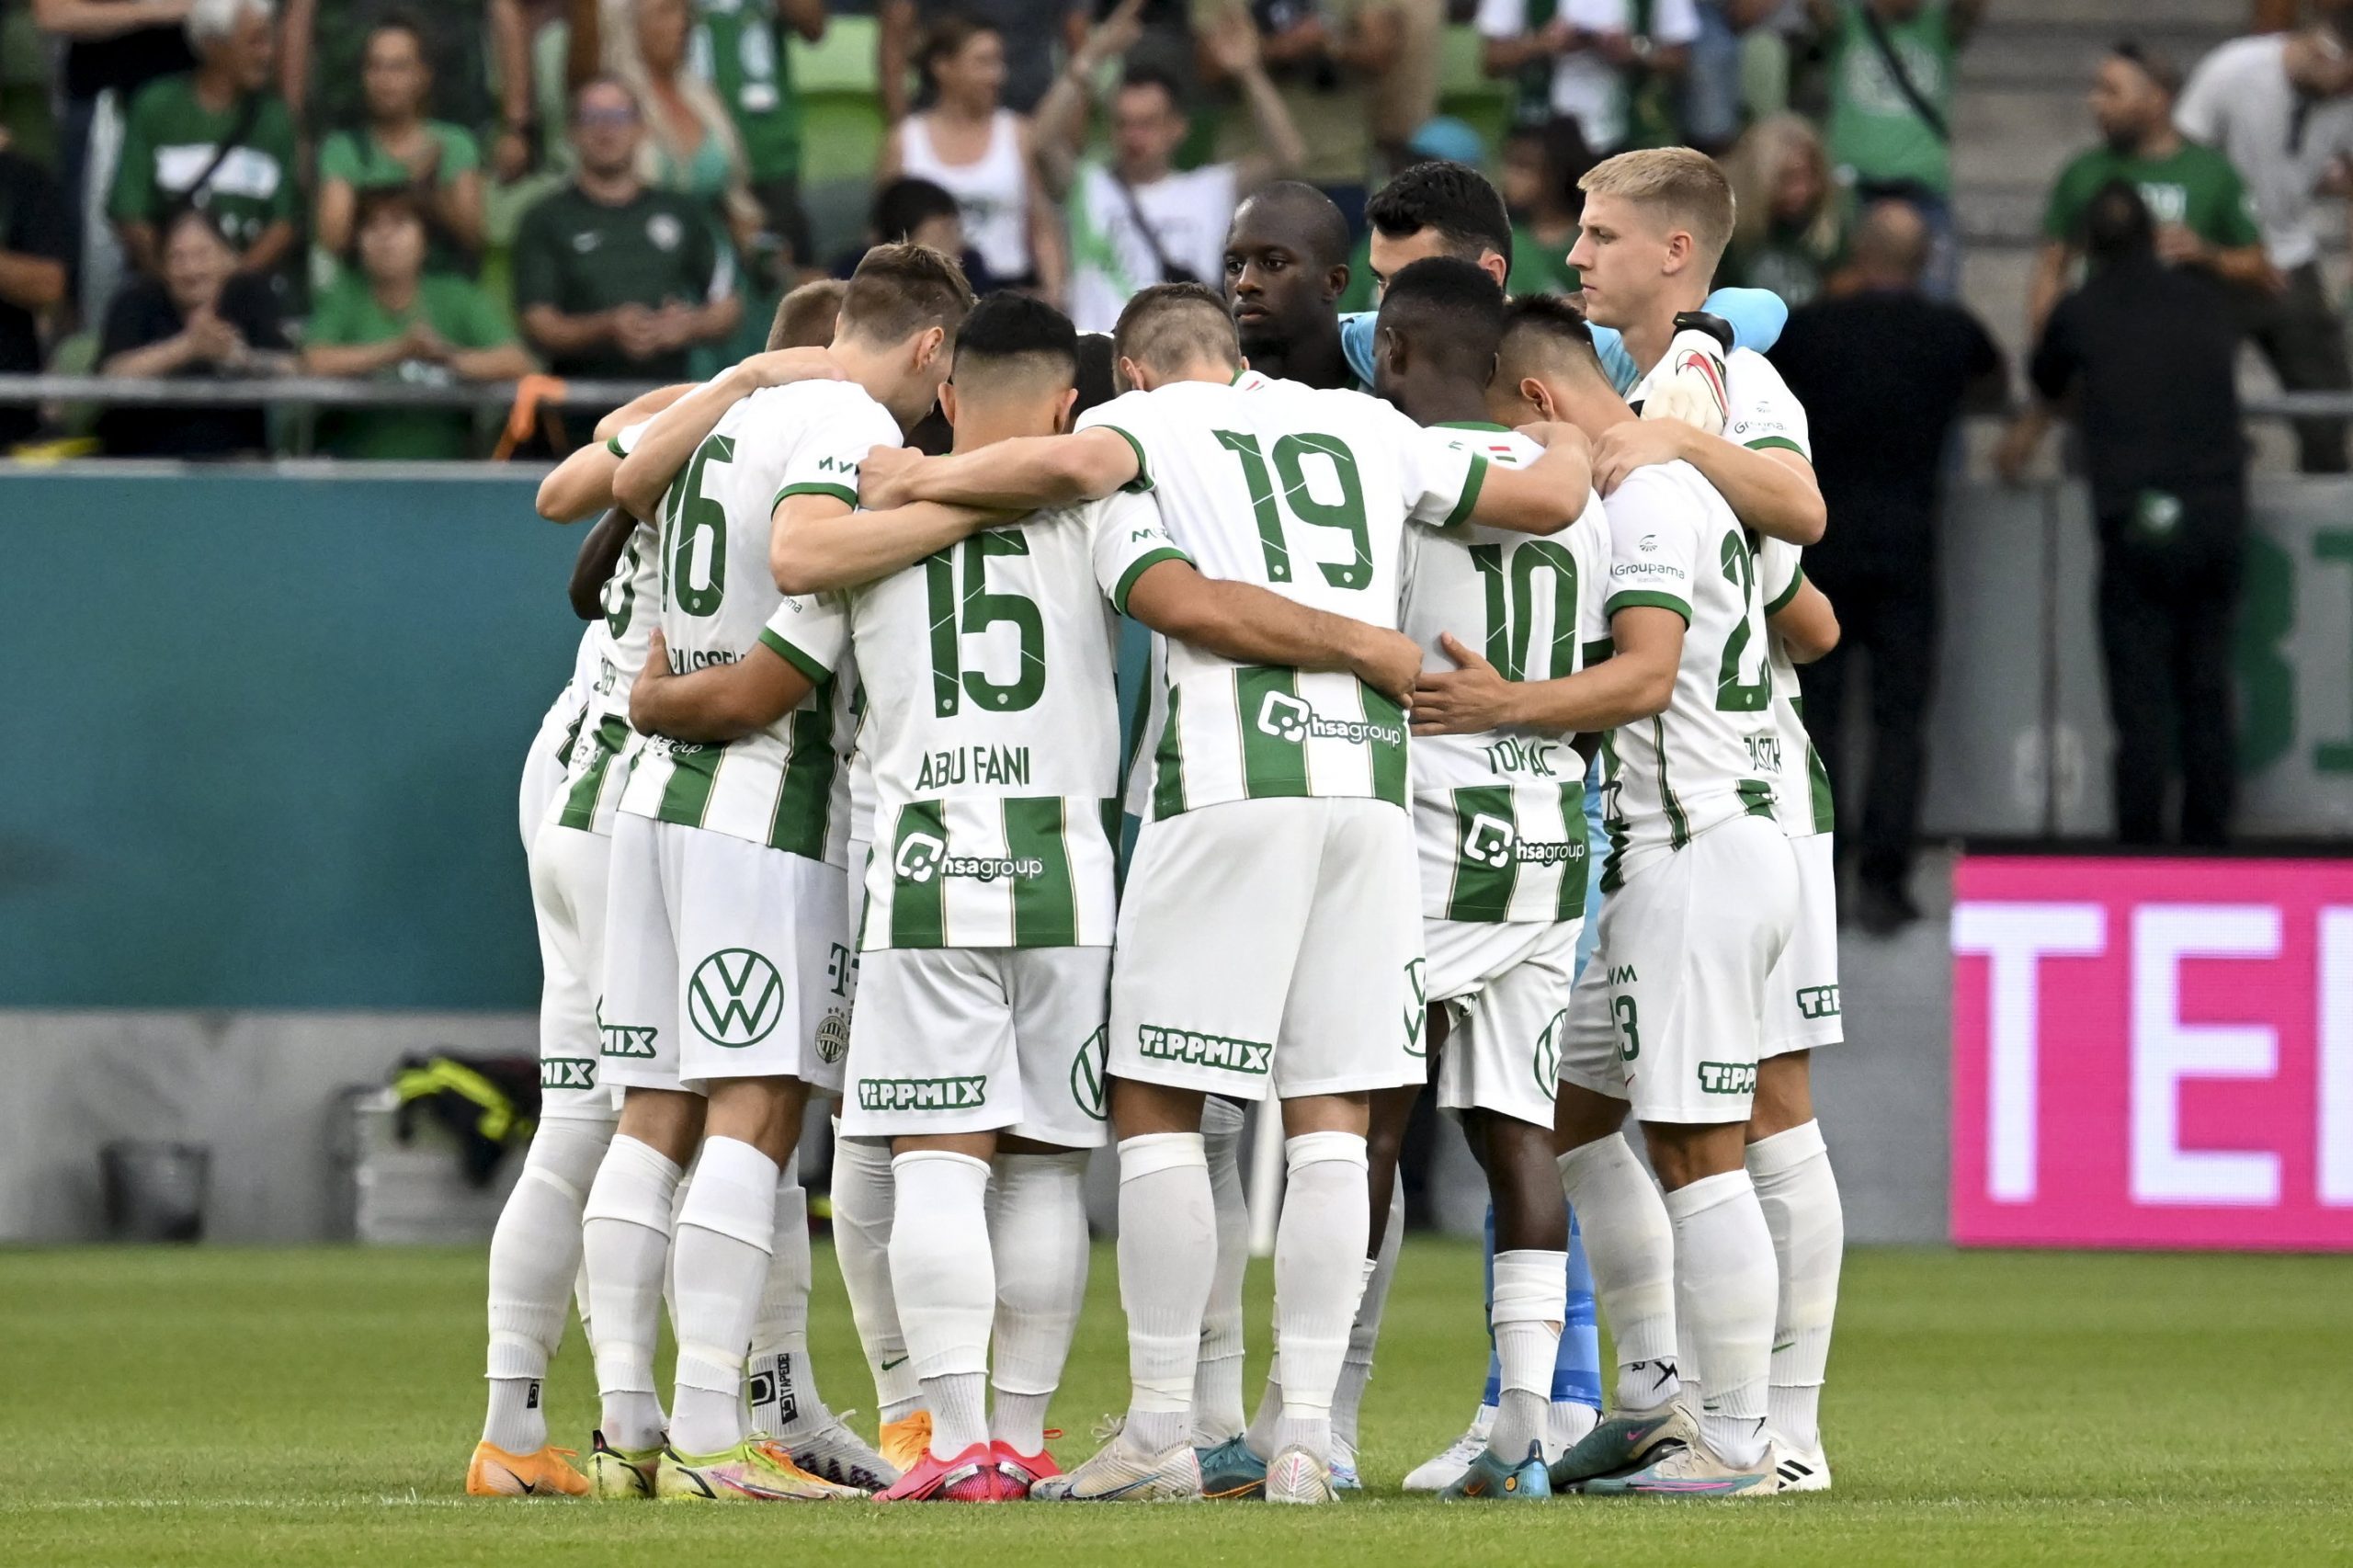 Still a Chance for Ferencváros in Conference League After Double Victory in Qualifiers